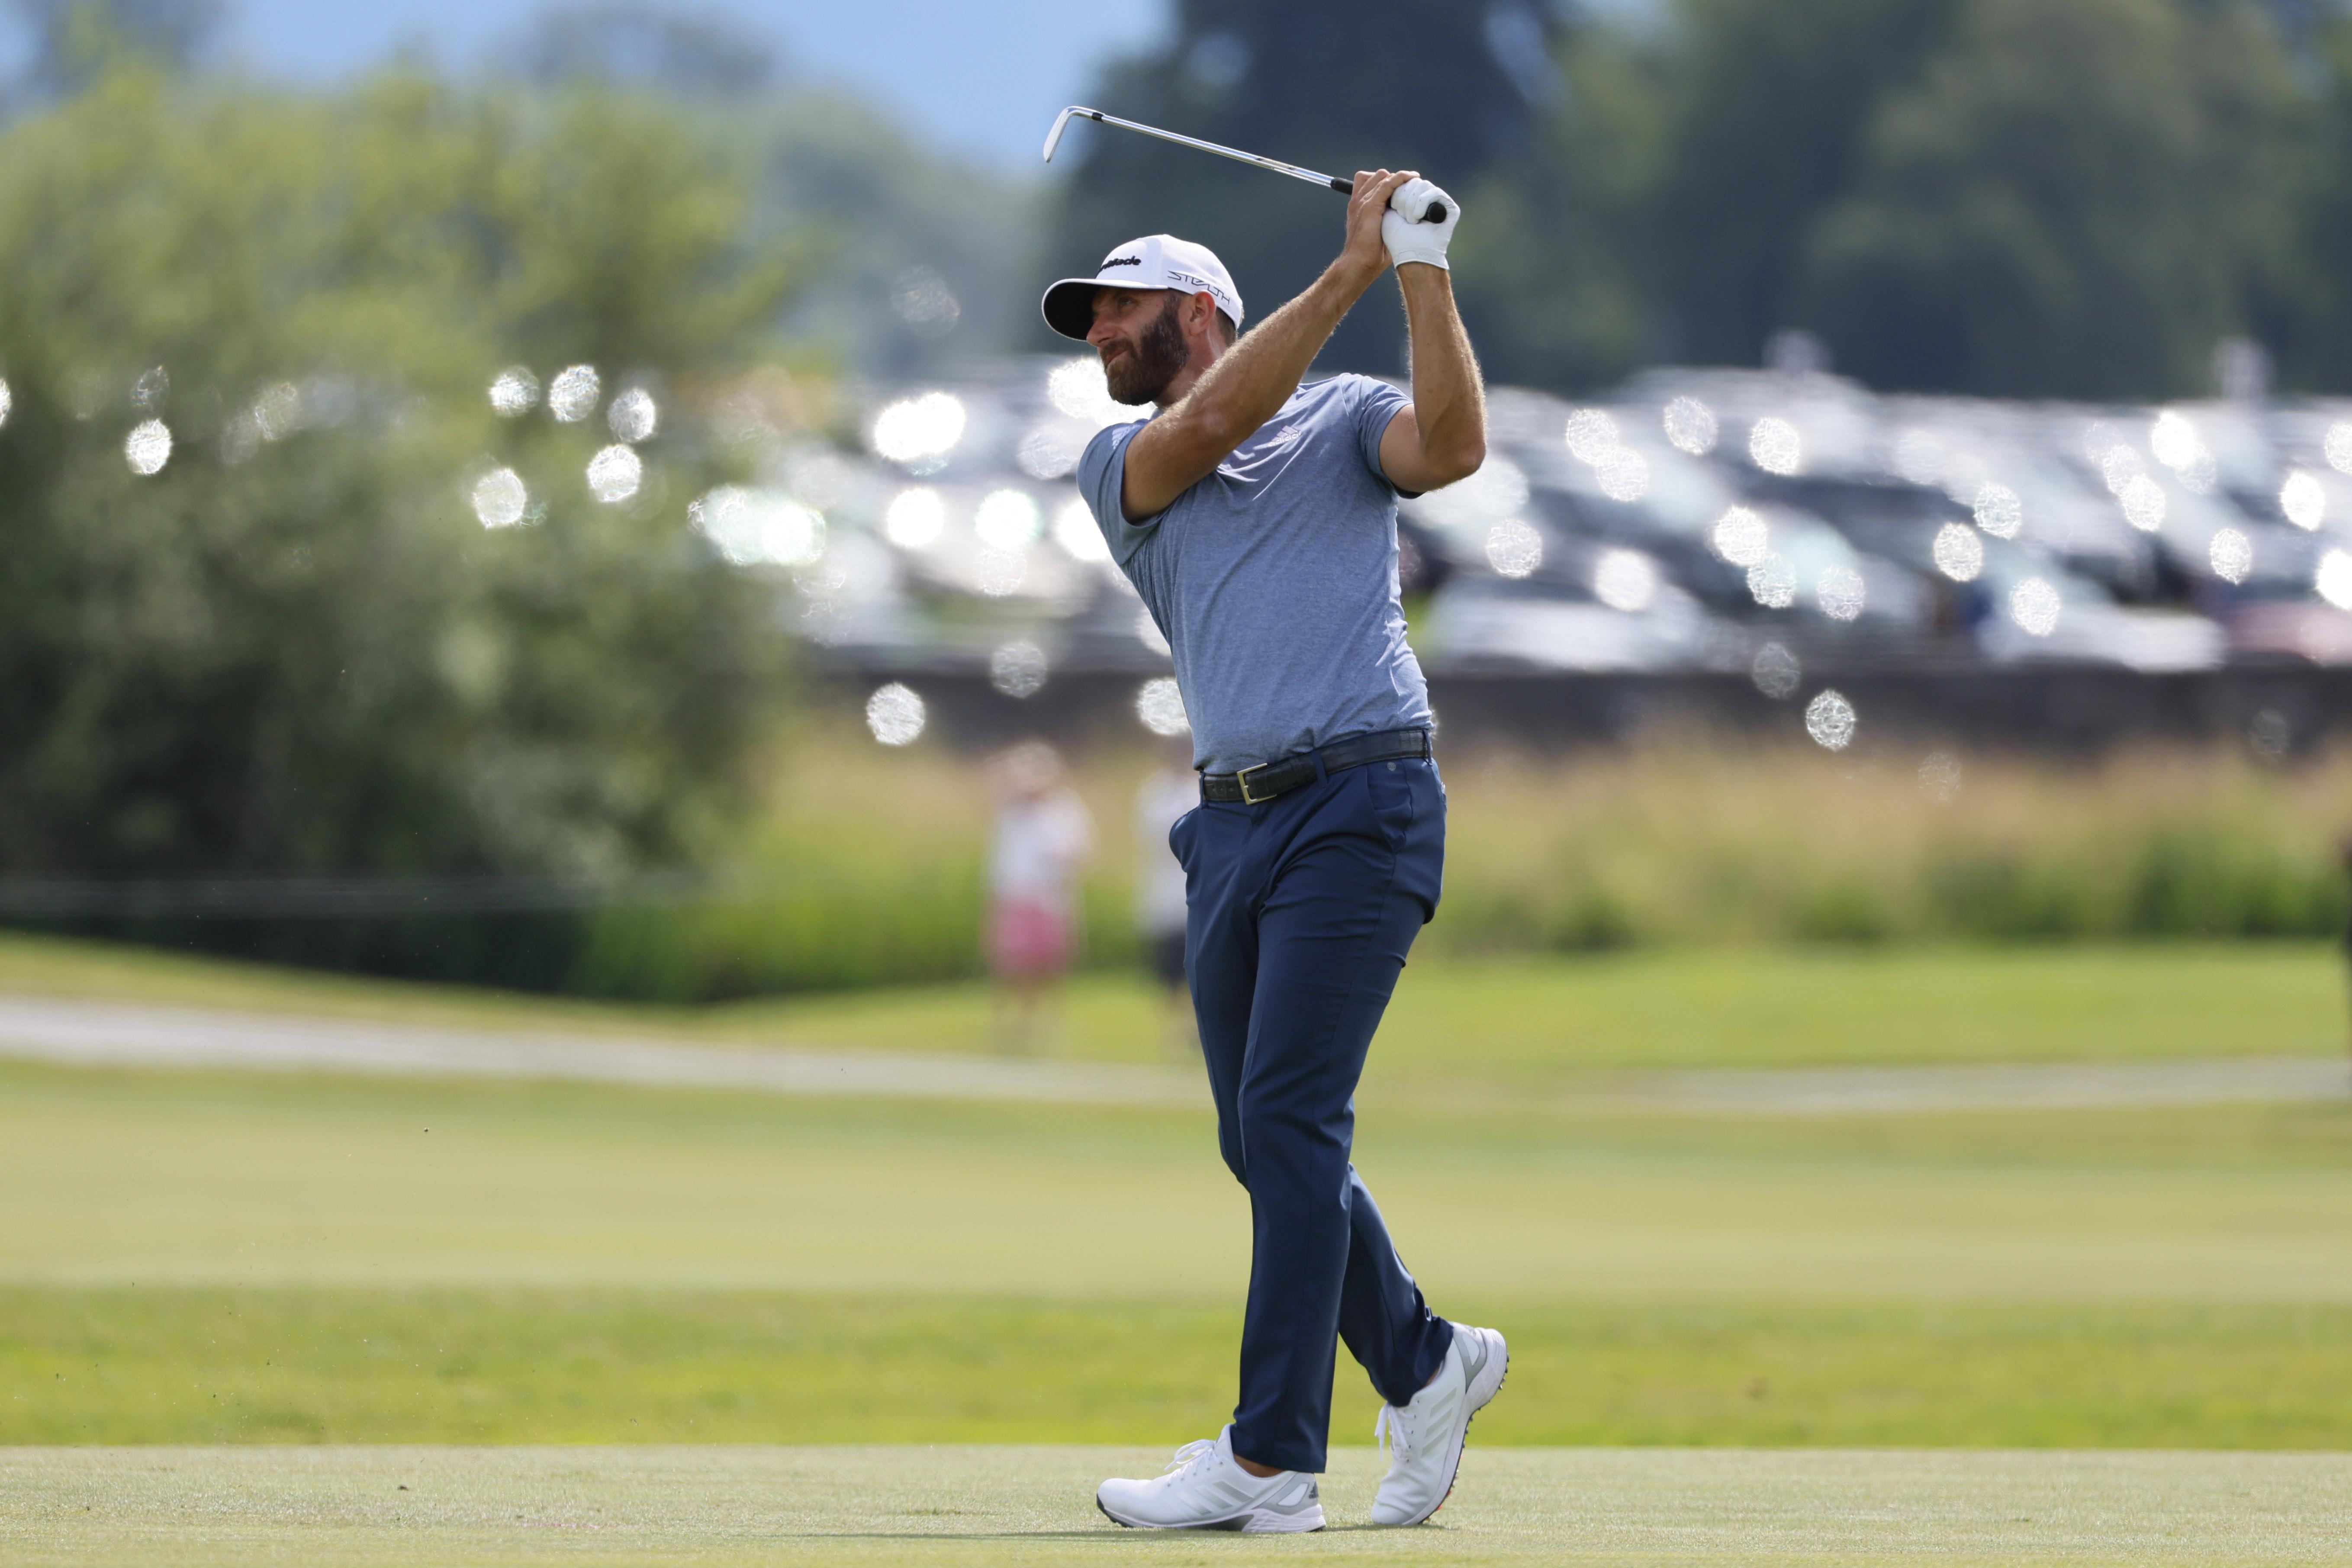 Dustin Johnson Open Championship 2022 Odds, History, Predictions and How to Watch FanDuel Research